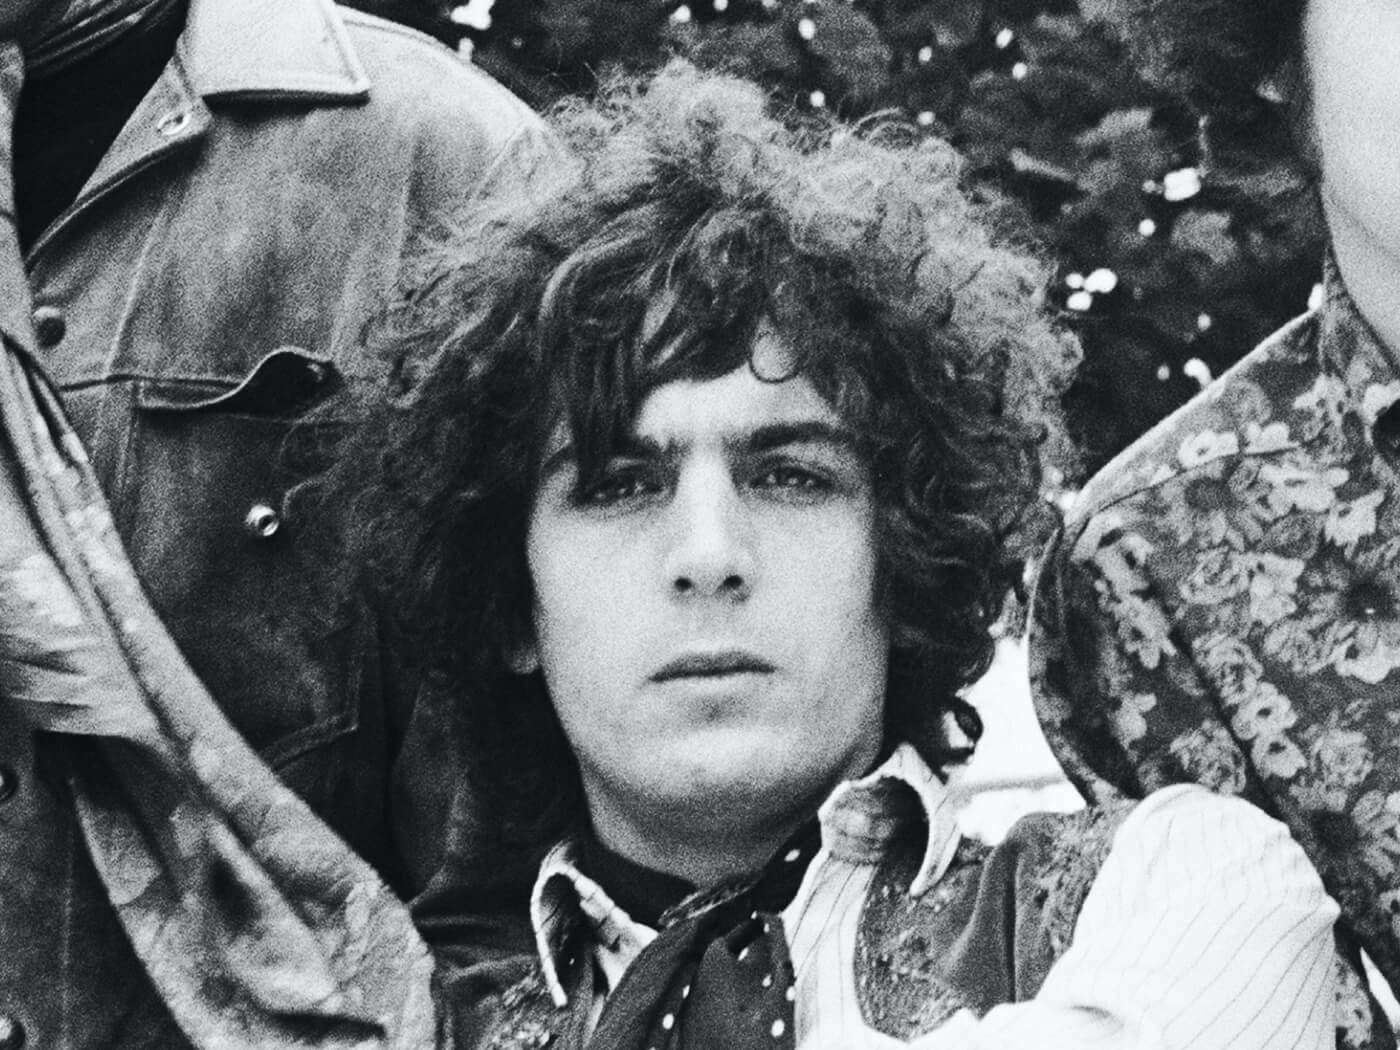 Syd Barrett to be subject of new documentary, Have You Got It Yet?